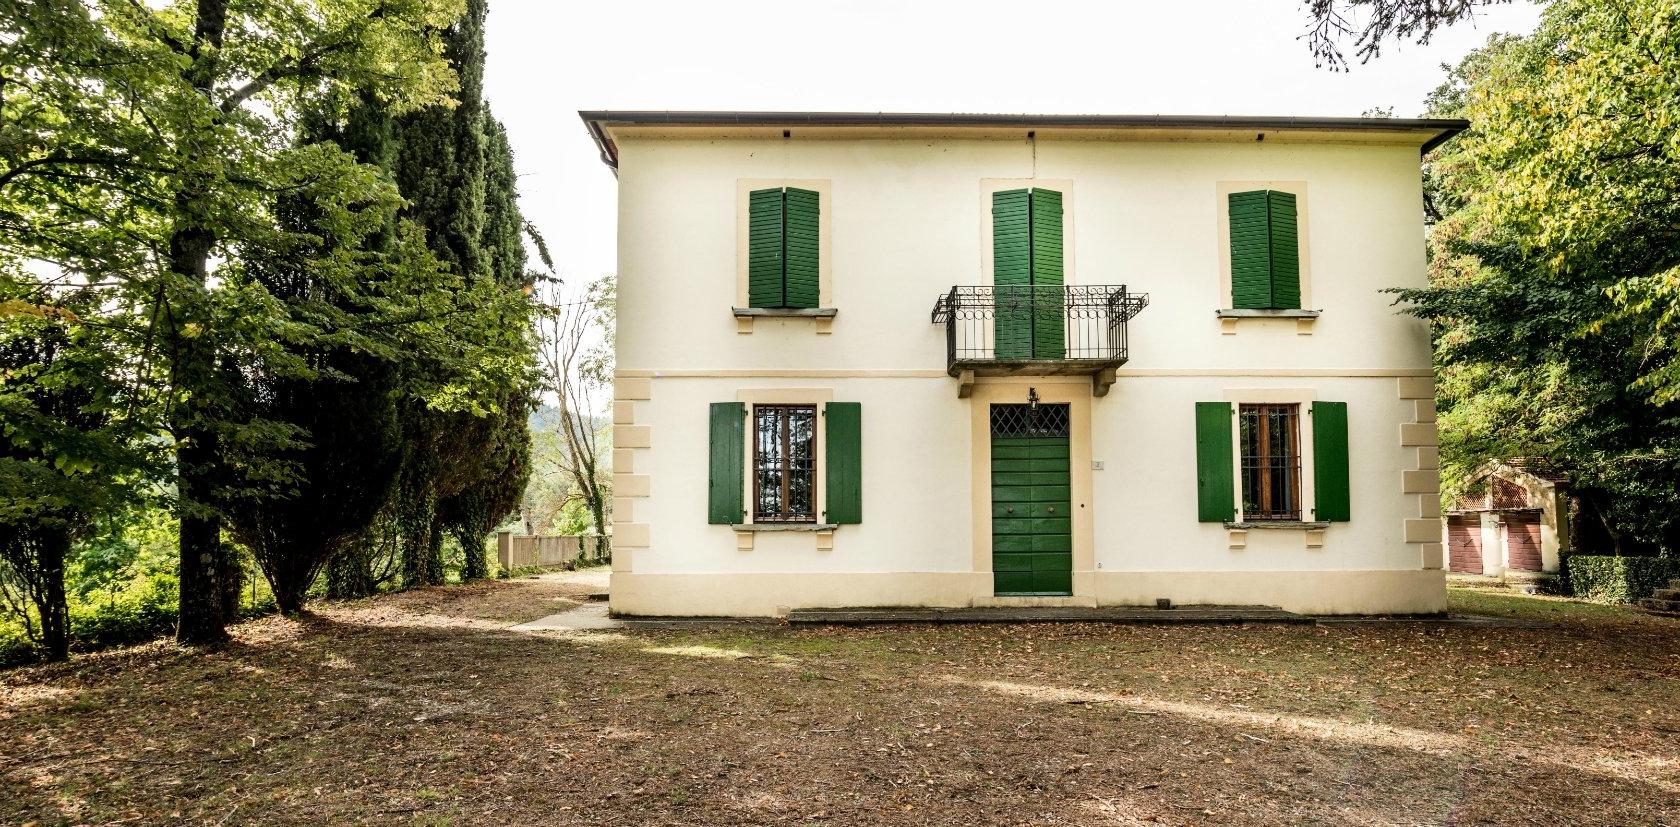 Toscana Immobiliare - The property is composed of the main villa, the guest house and dependance